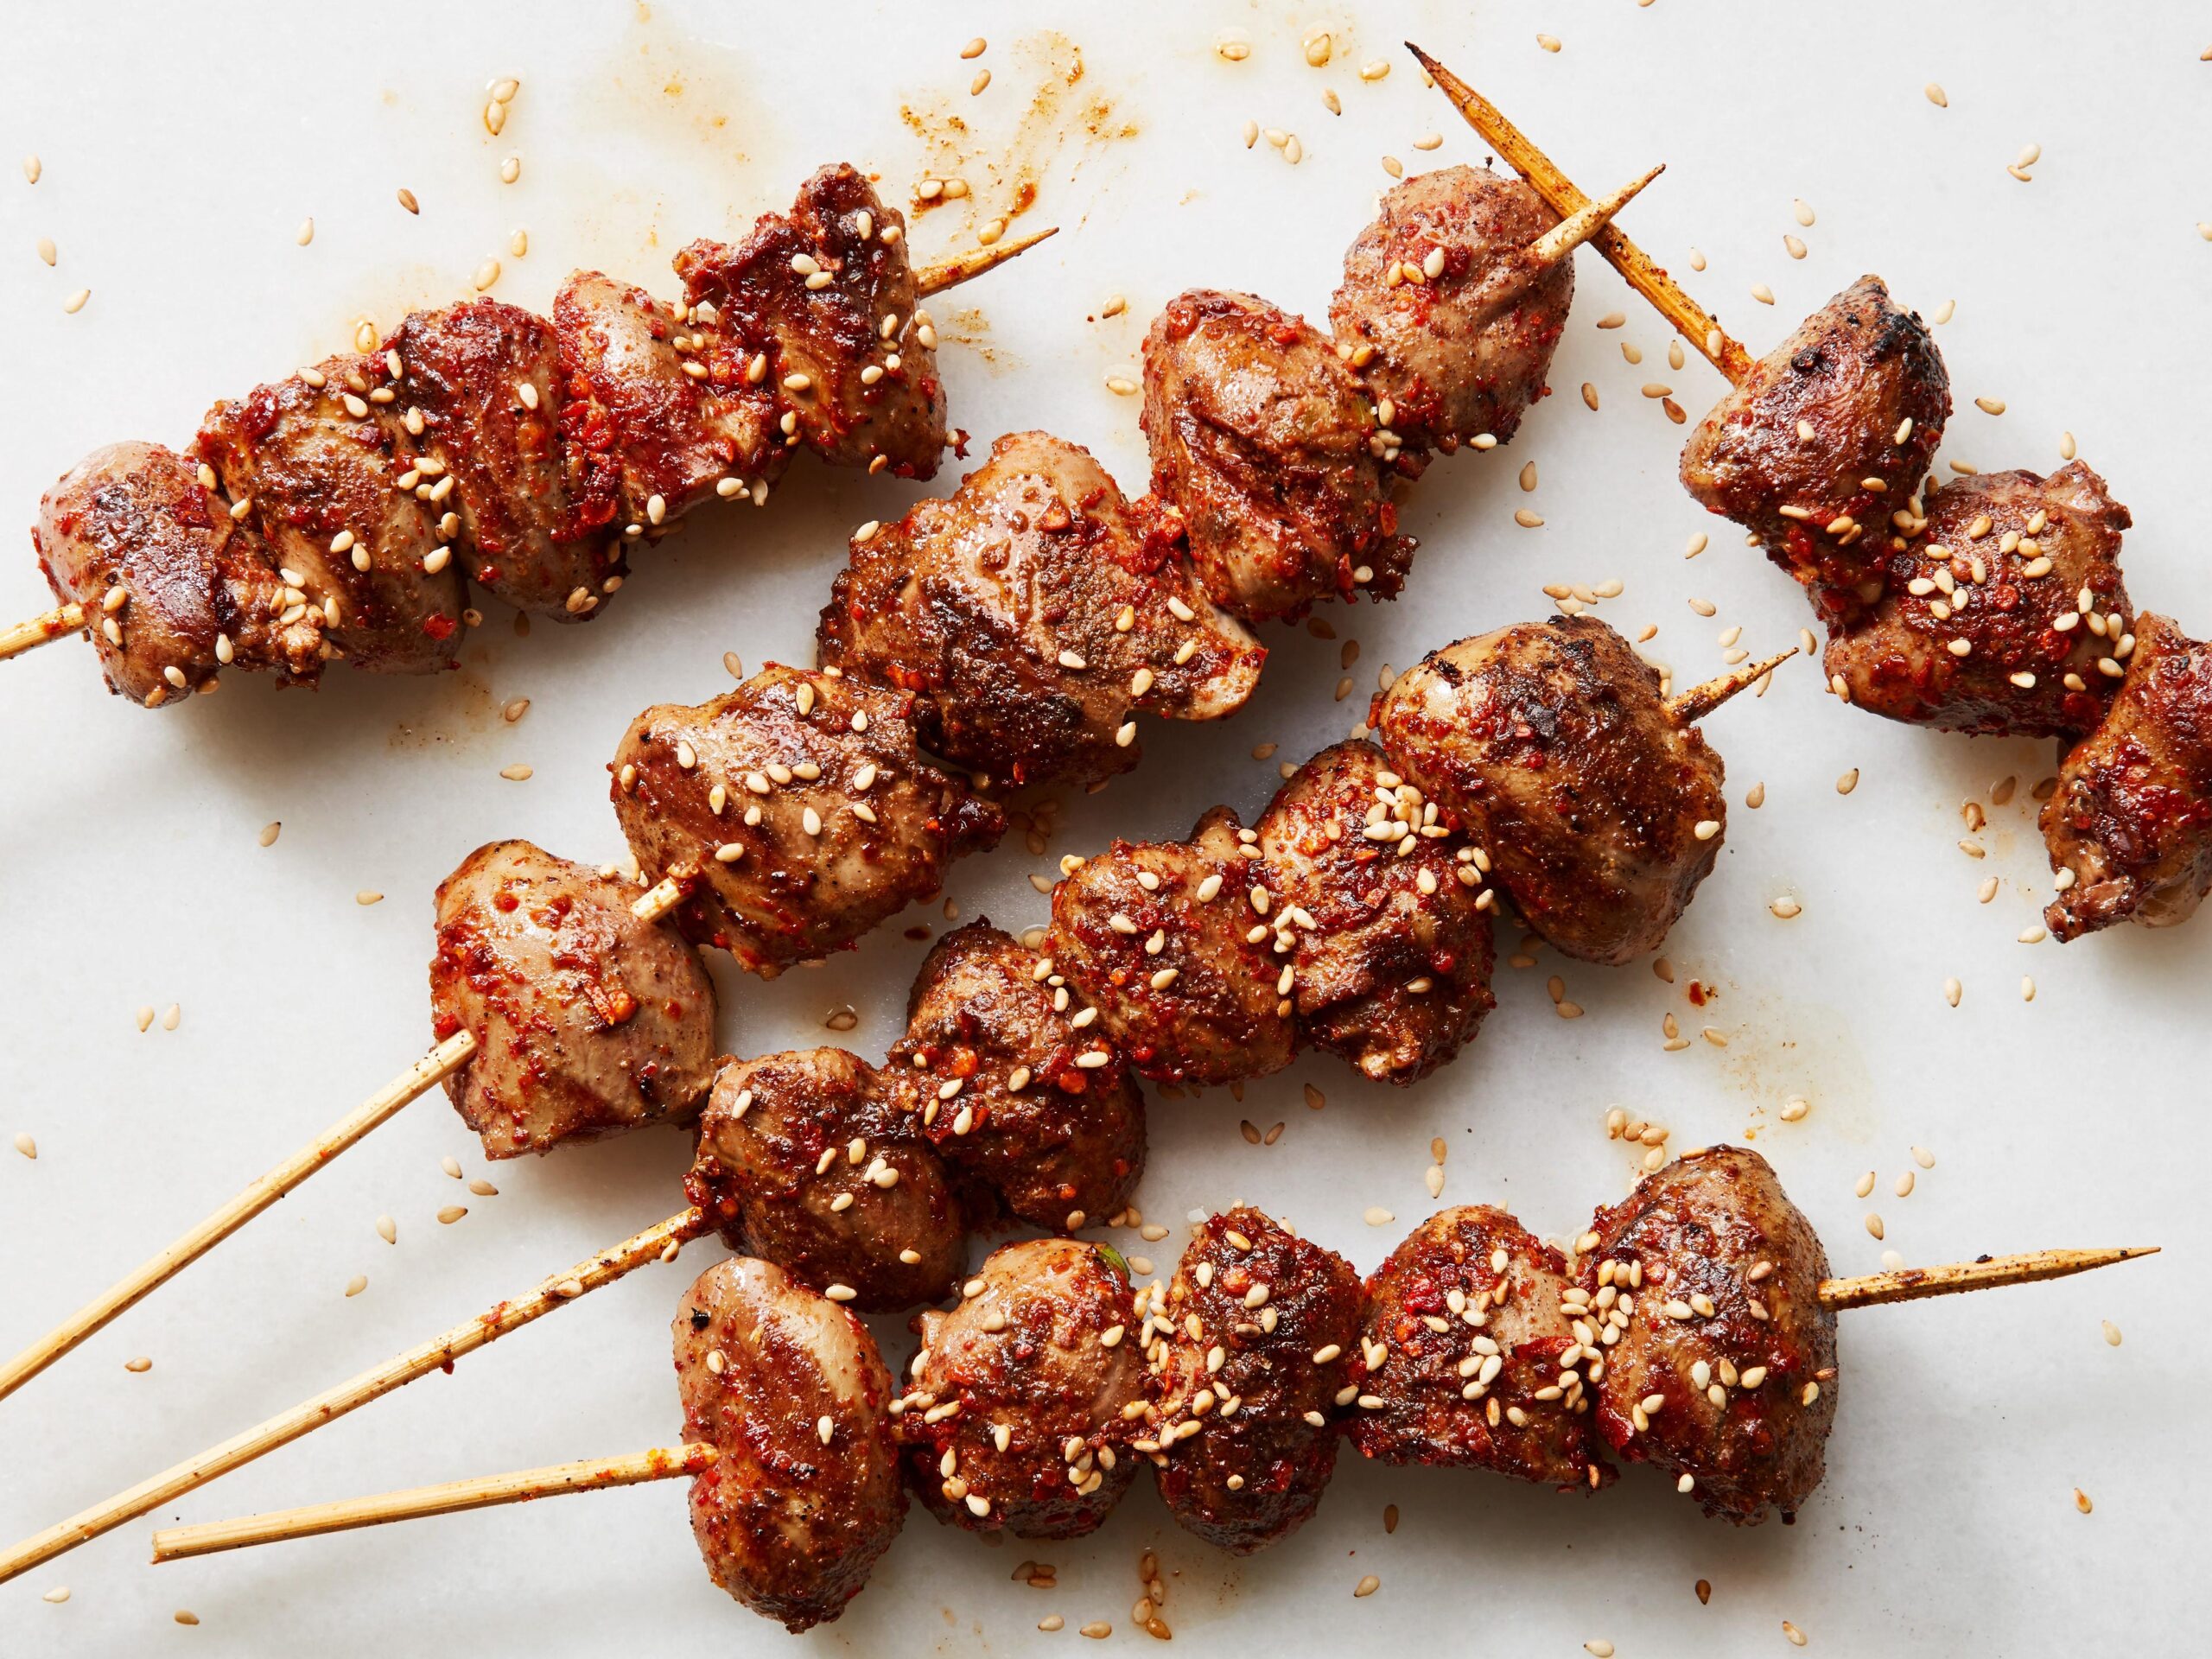  These kebabs are perfect for adventurous eaters who want to try something new and flavorful! 🤤👀